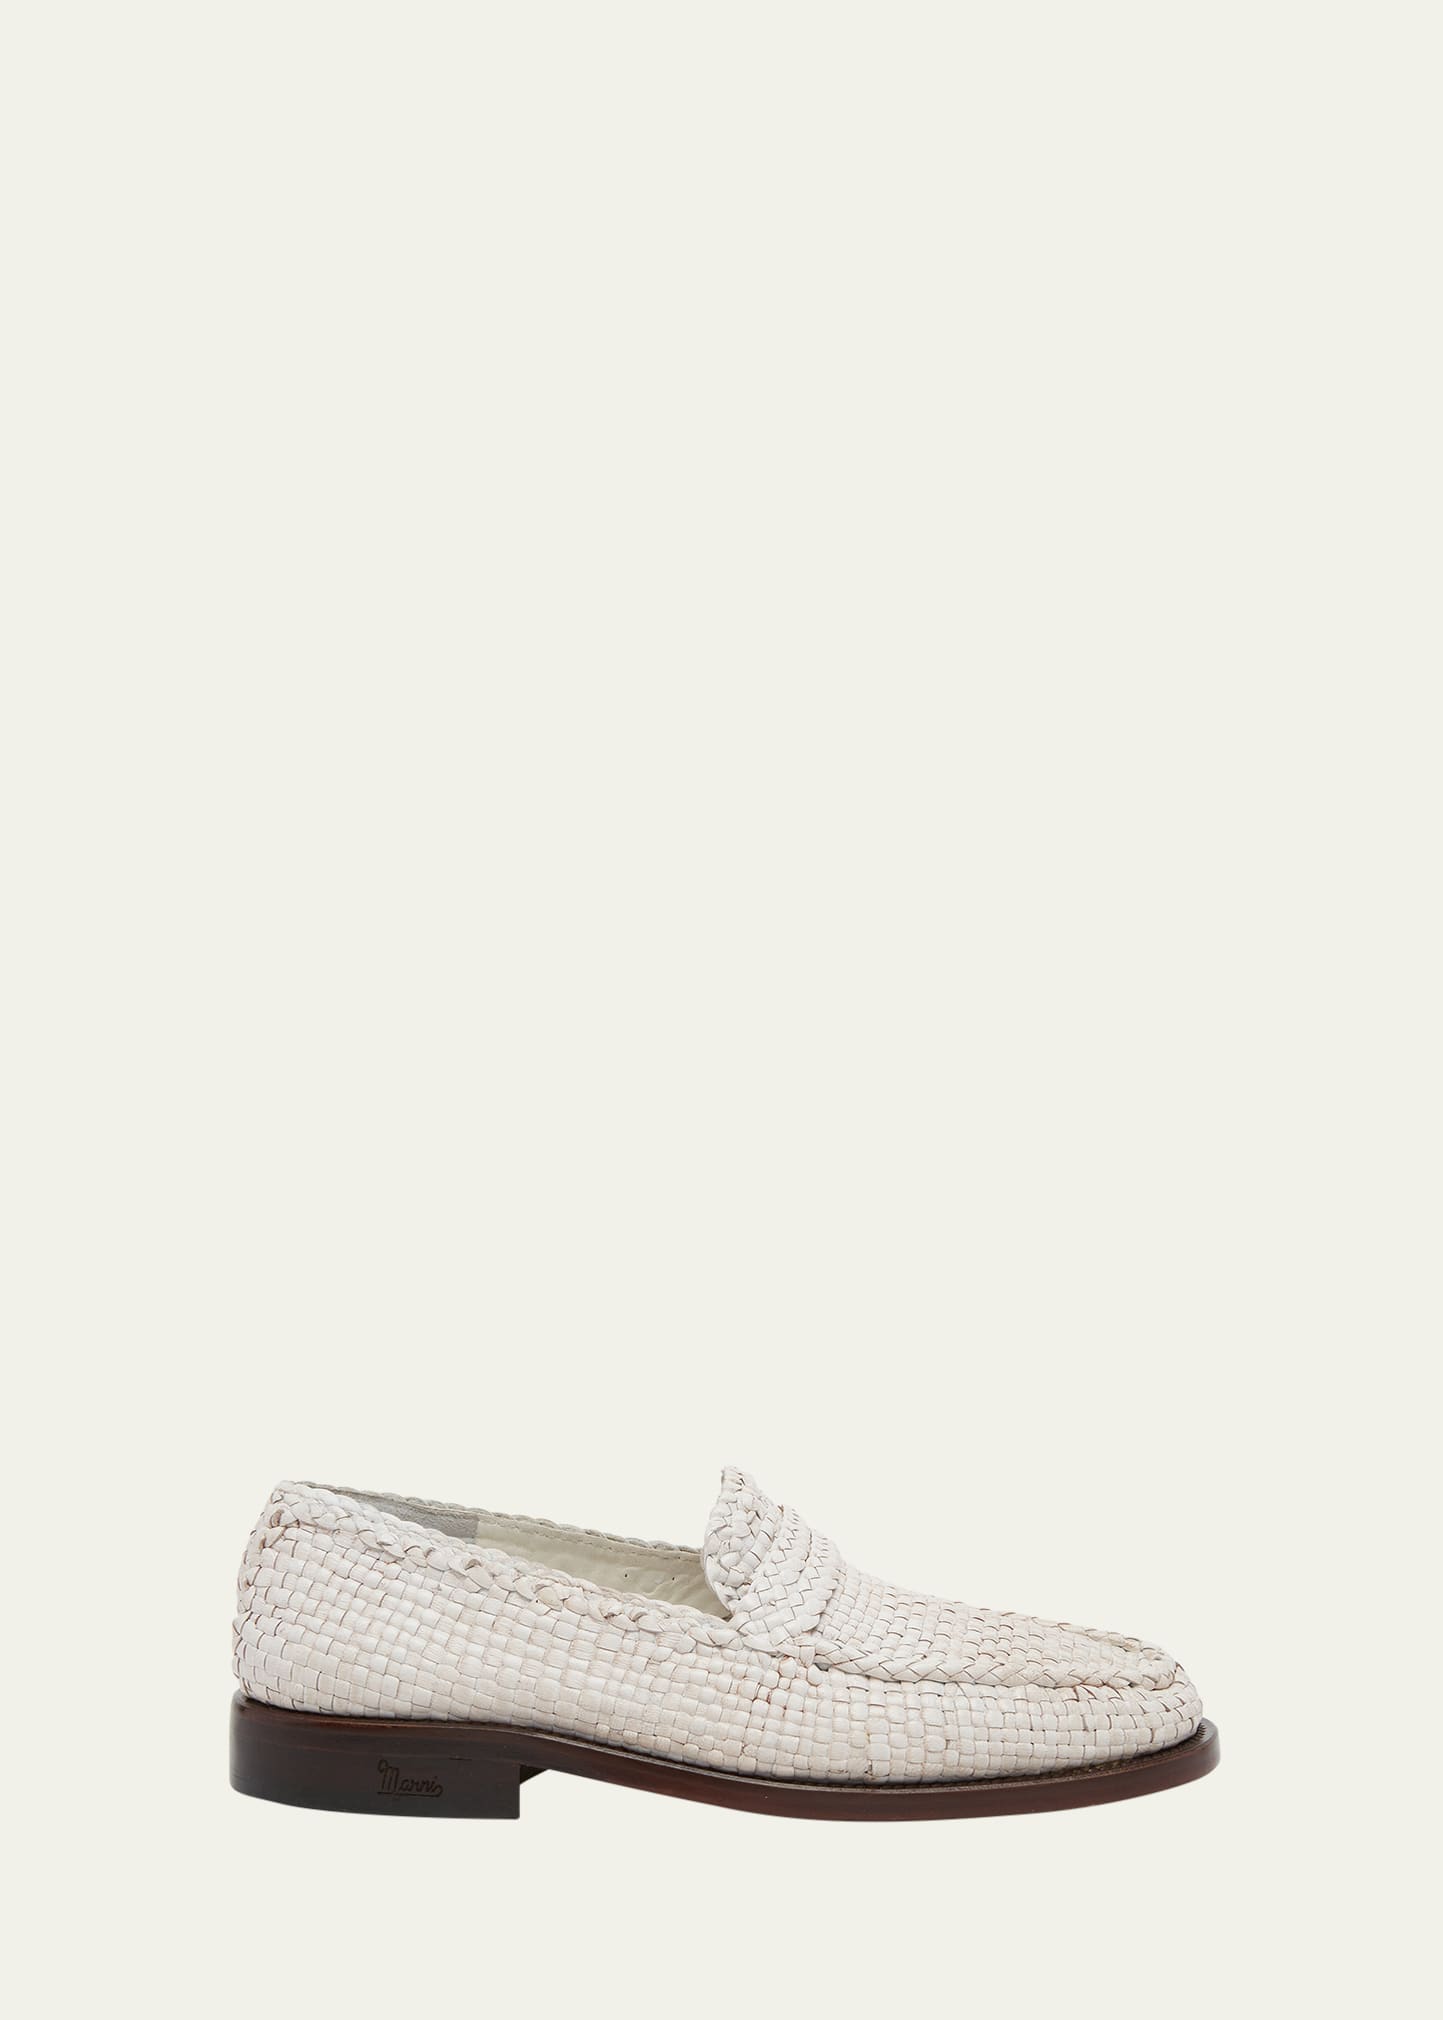 Marni Woven Leather Penny Loafers In Lily White